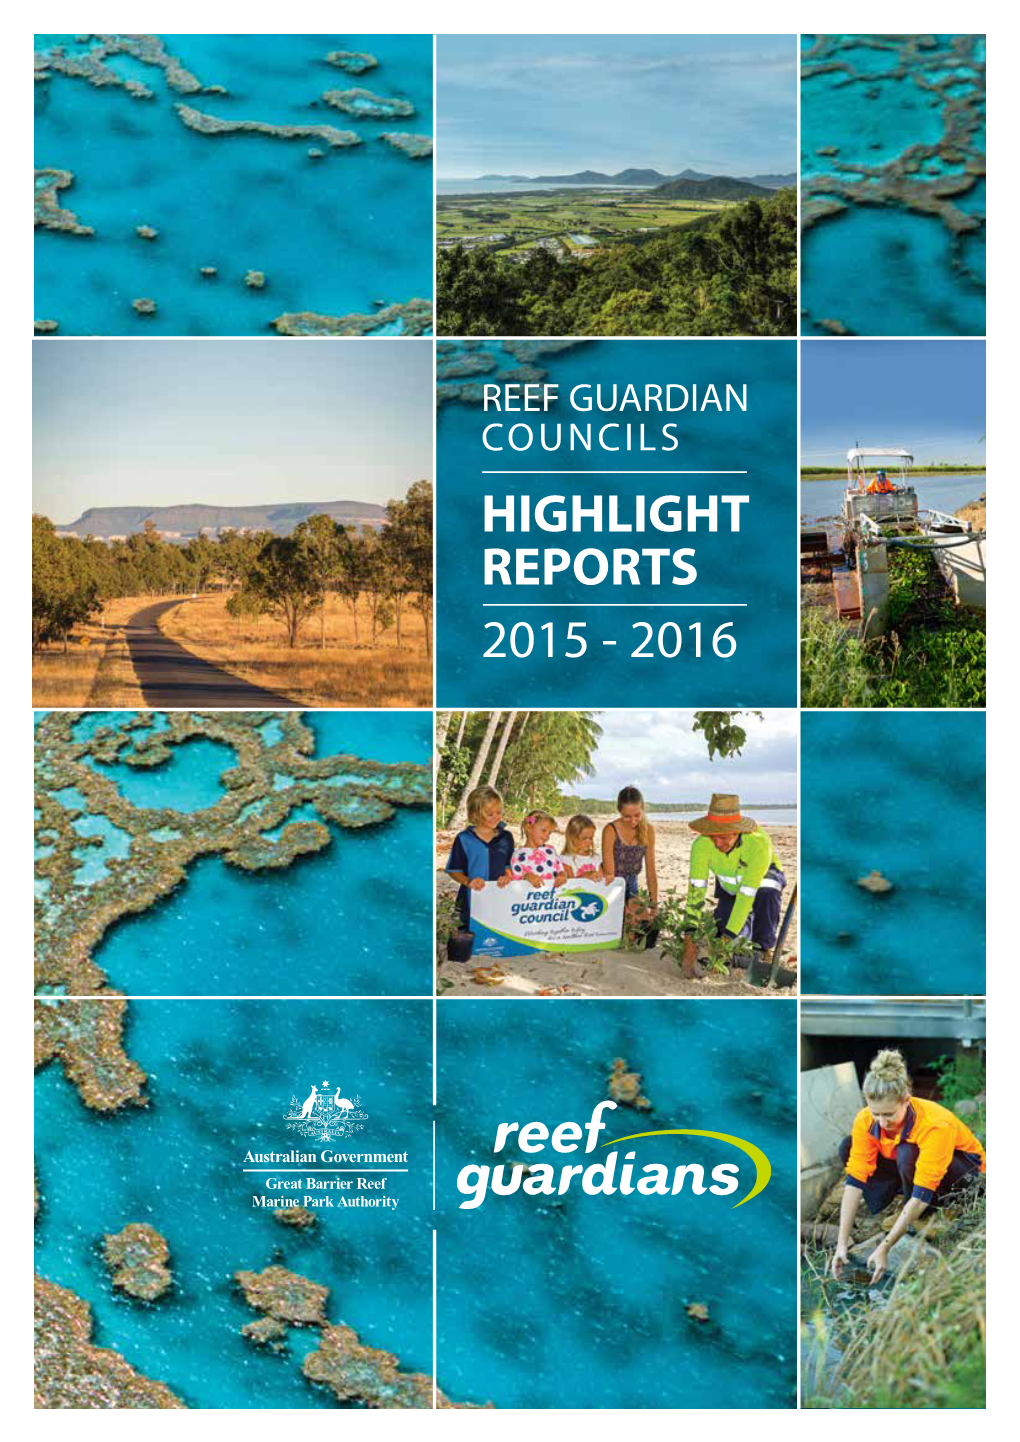 REEF GUARDIAN COUNCILS HIGHLIGHT REPORTS 2015 - 2016 © Commonwealth of Australia 2017